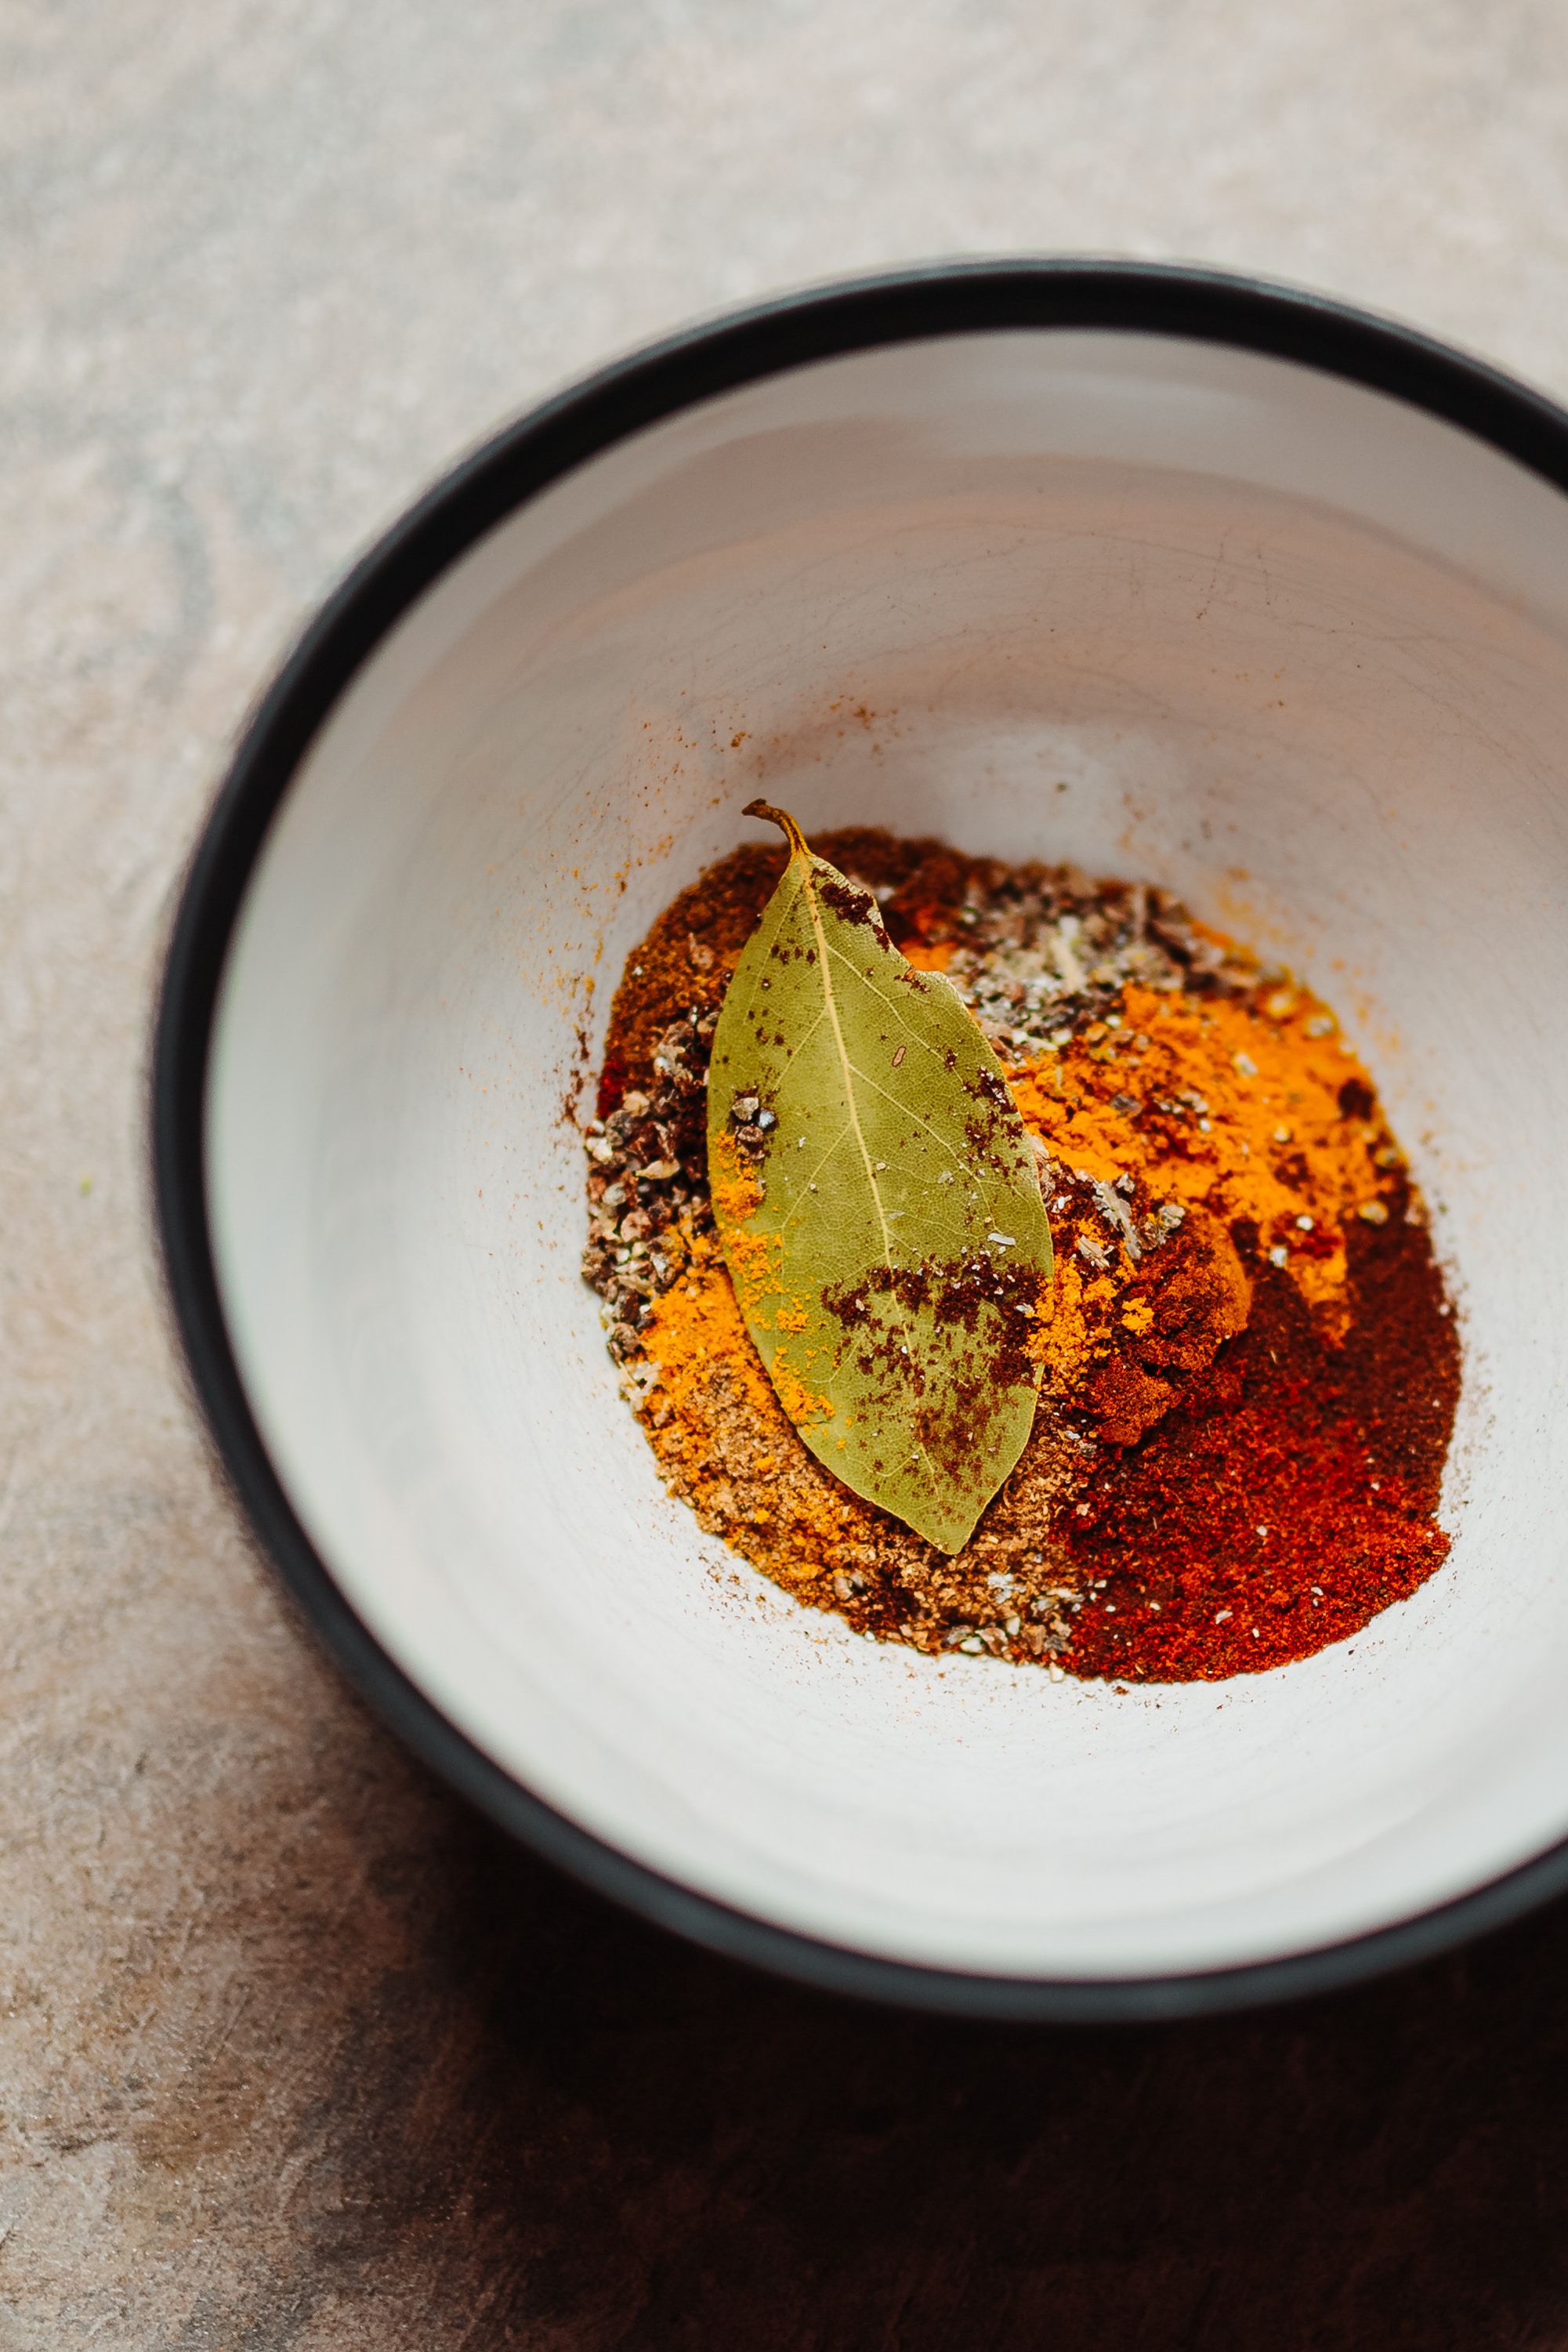 Spices Photo by Andy Holmes on Unsplash